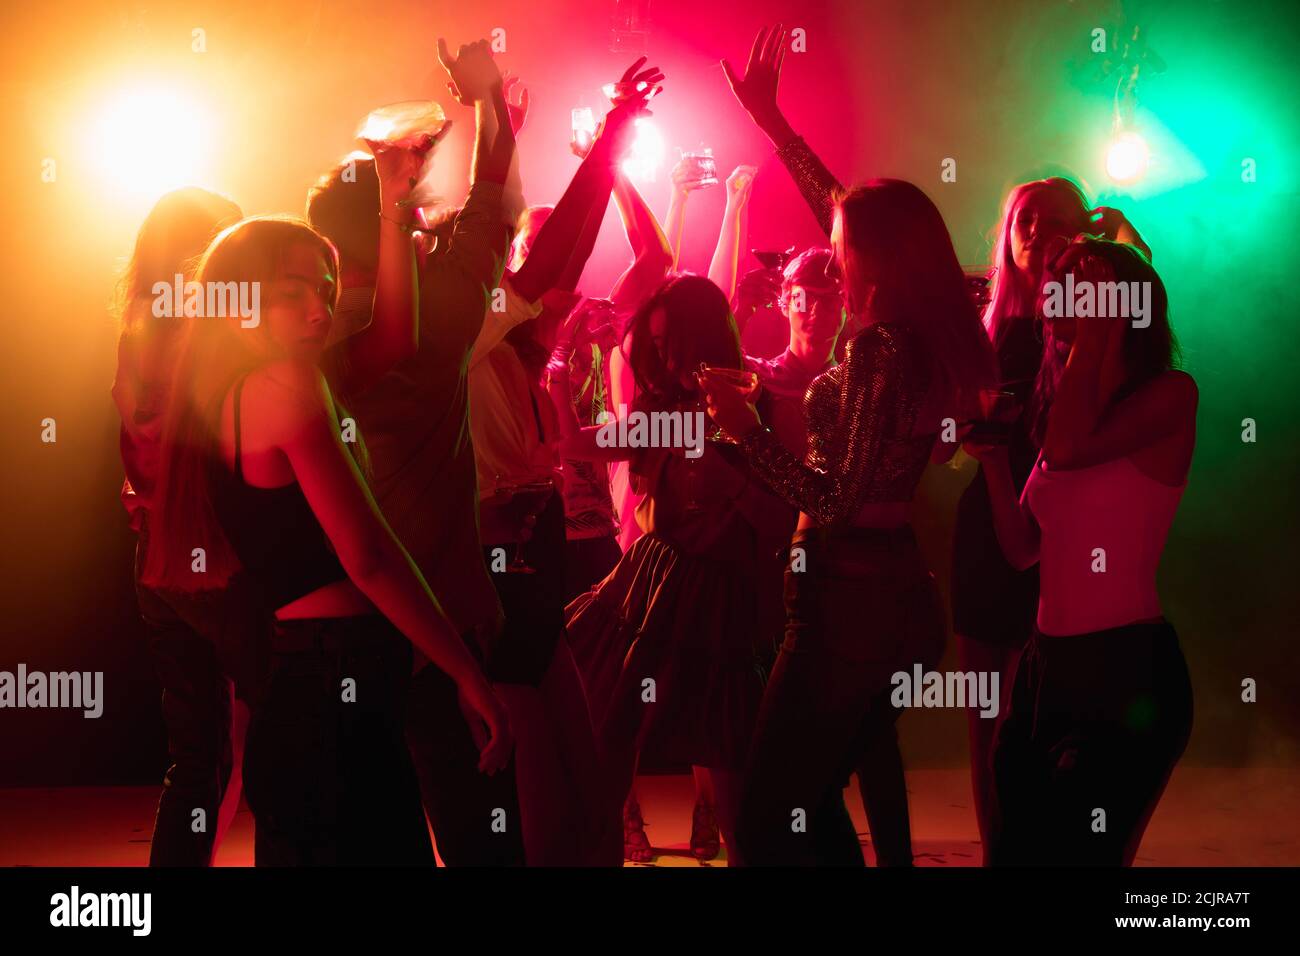 Nightclub Silhouette Of People Having Fun Stock Photo - Download Image Now  - Glow Stick, Party - Social Event, Neon Colored - iStock